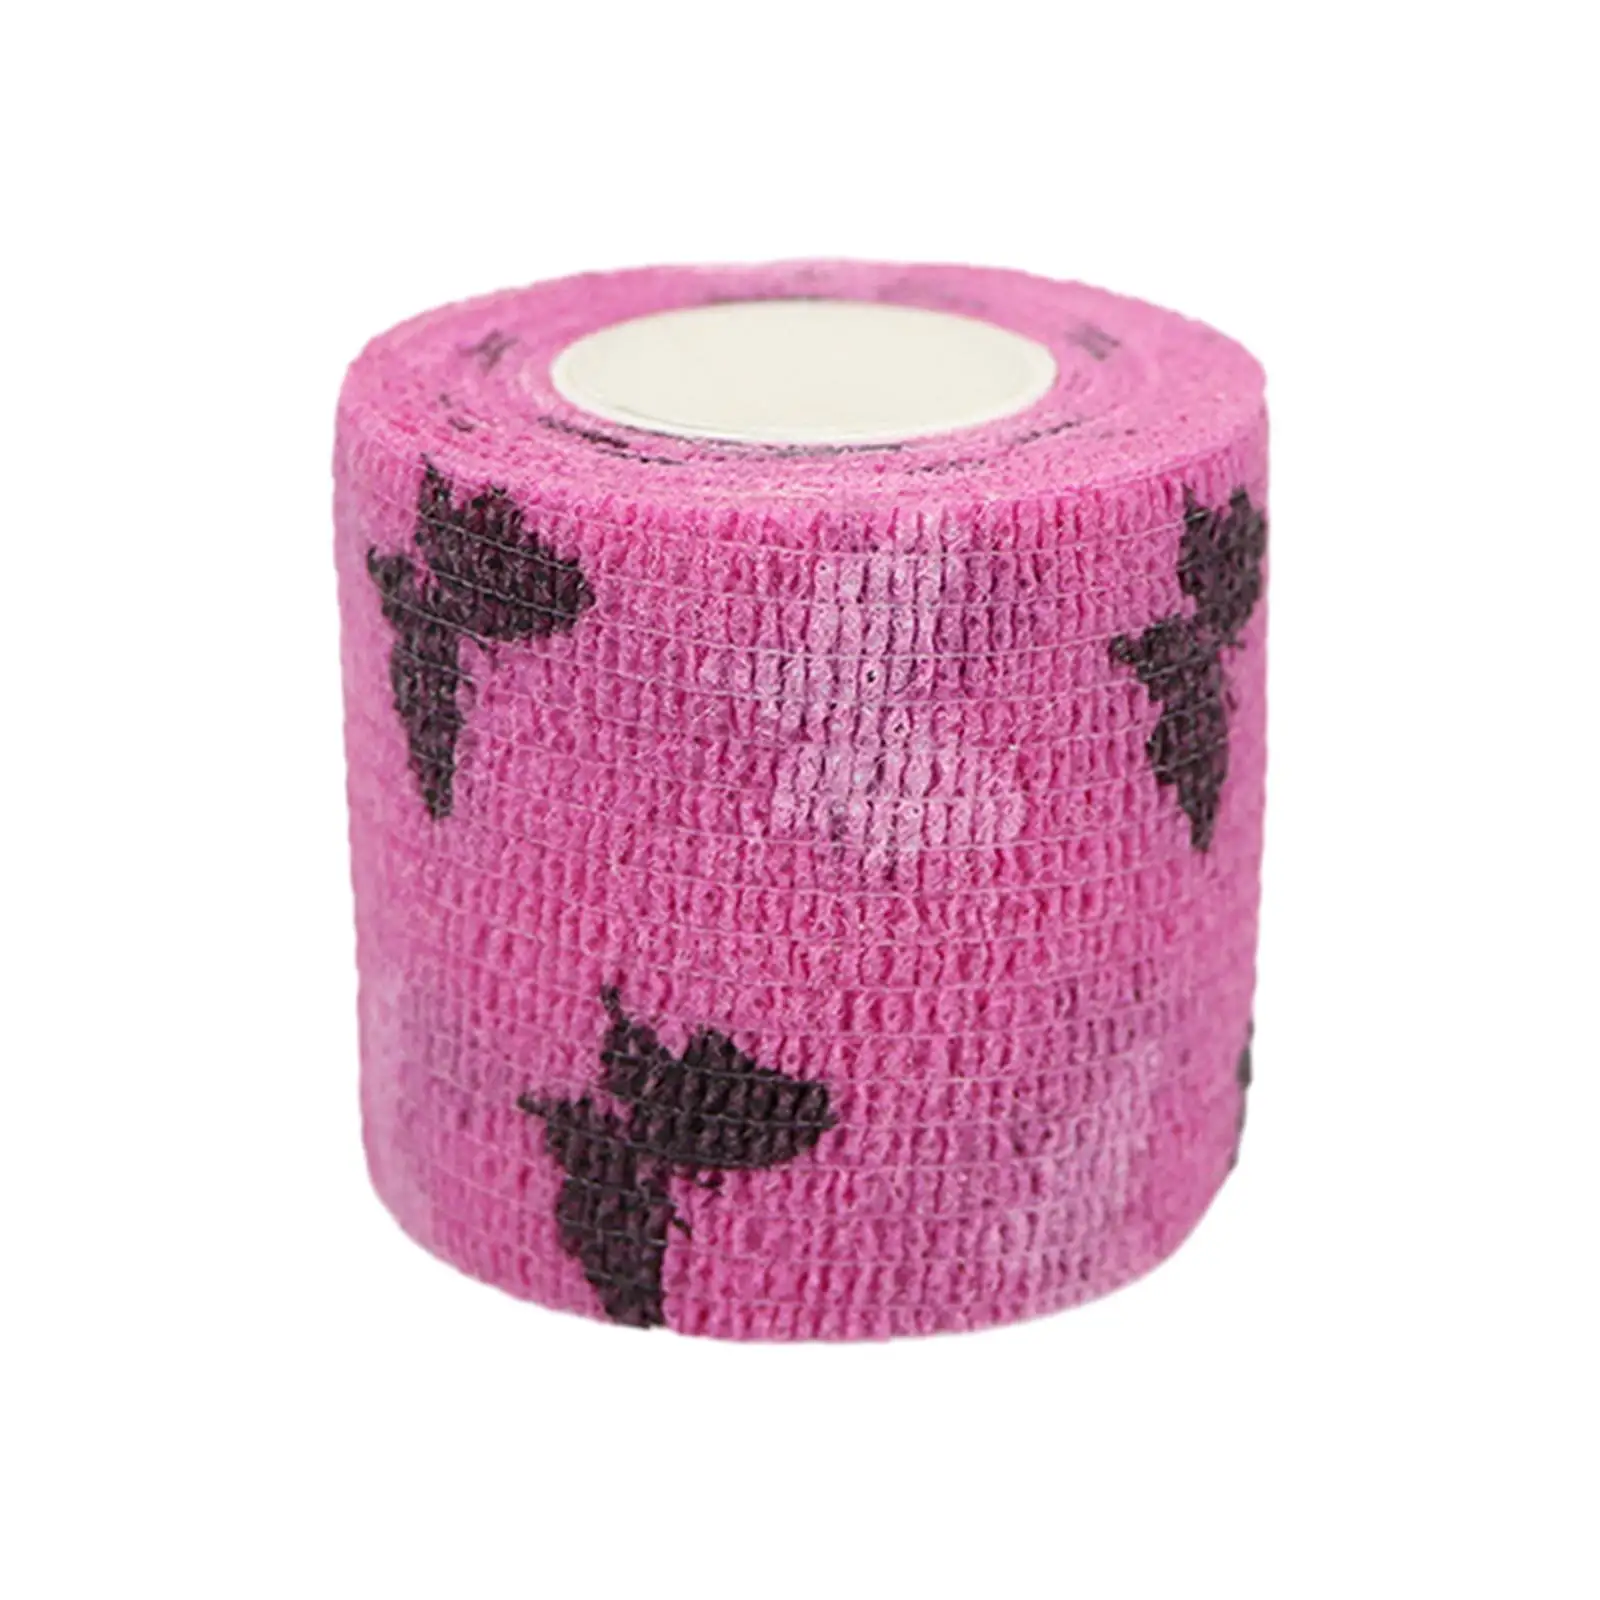 Self Adhesive Elastic Bandage Protector Anti Wear Width 2.5cm Guard Vet Tape for Pet Horse Legs Small Animal Dogs Paws Sports